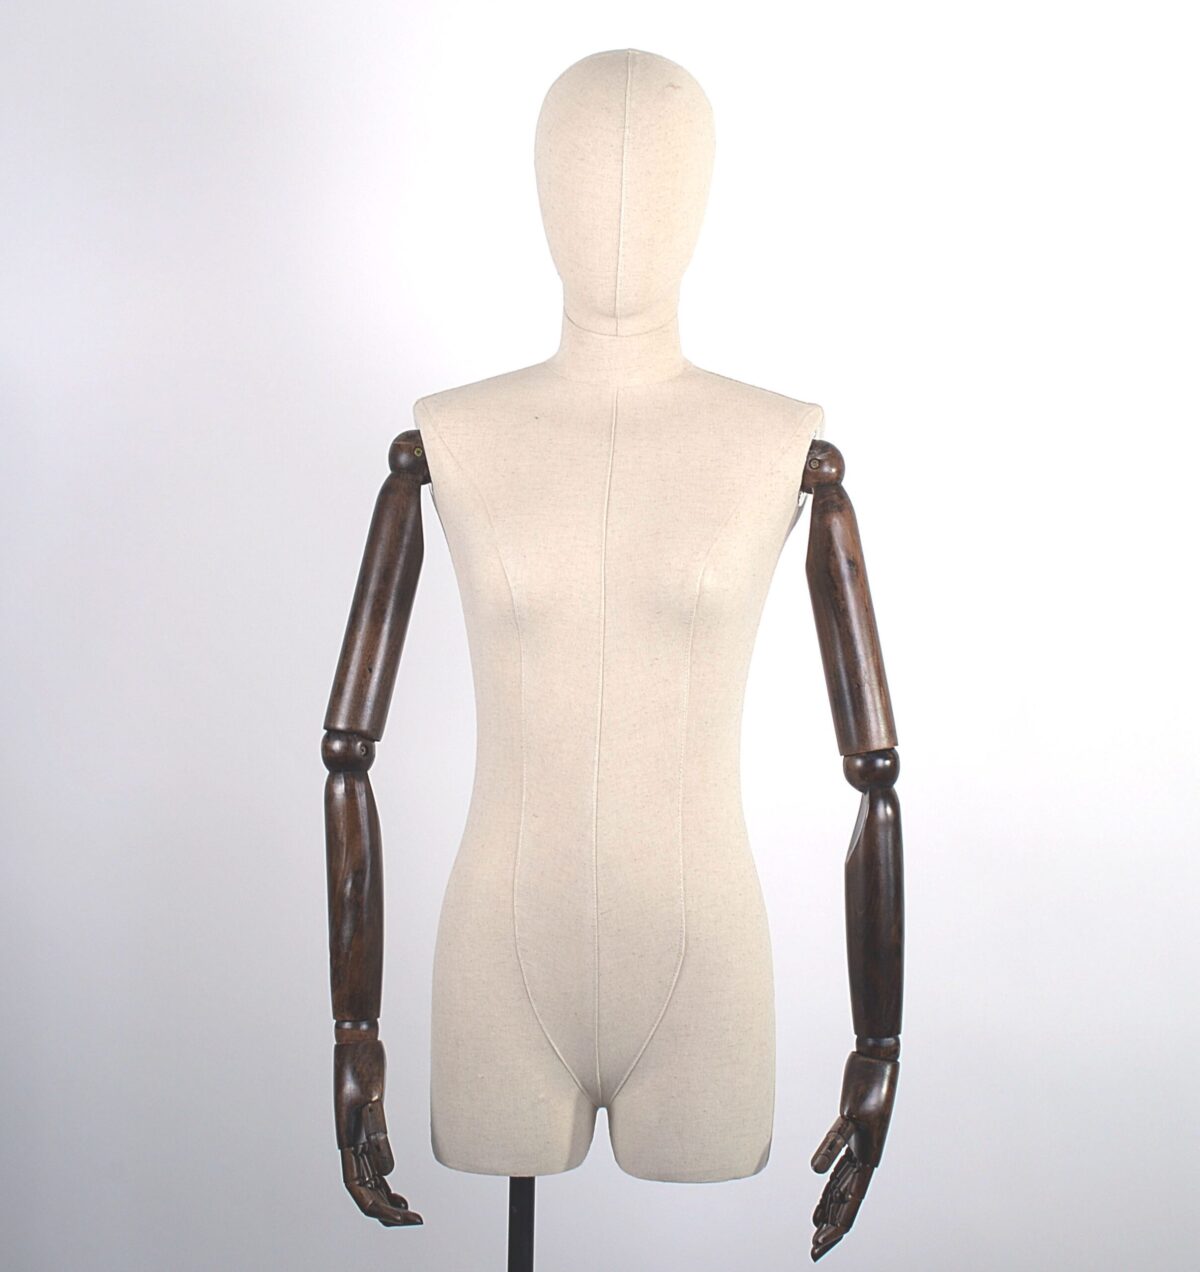 Articulated Female Torso Arms By Side scaled